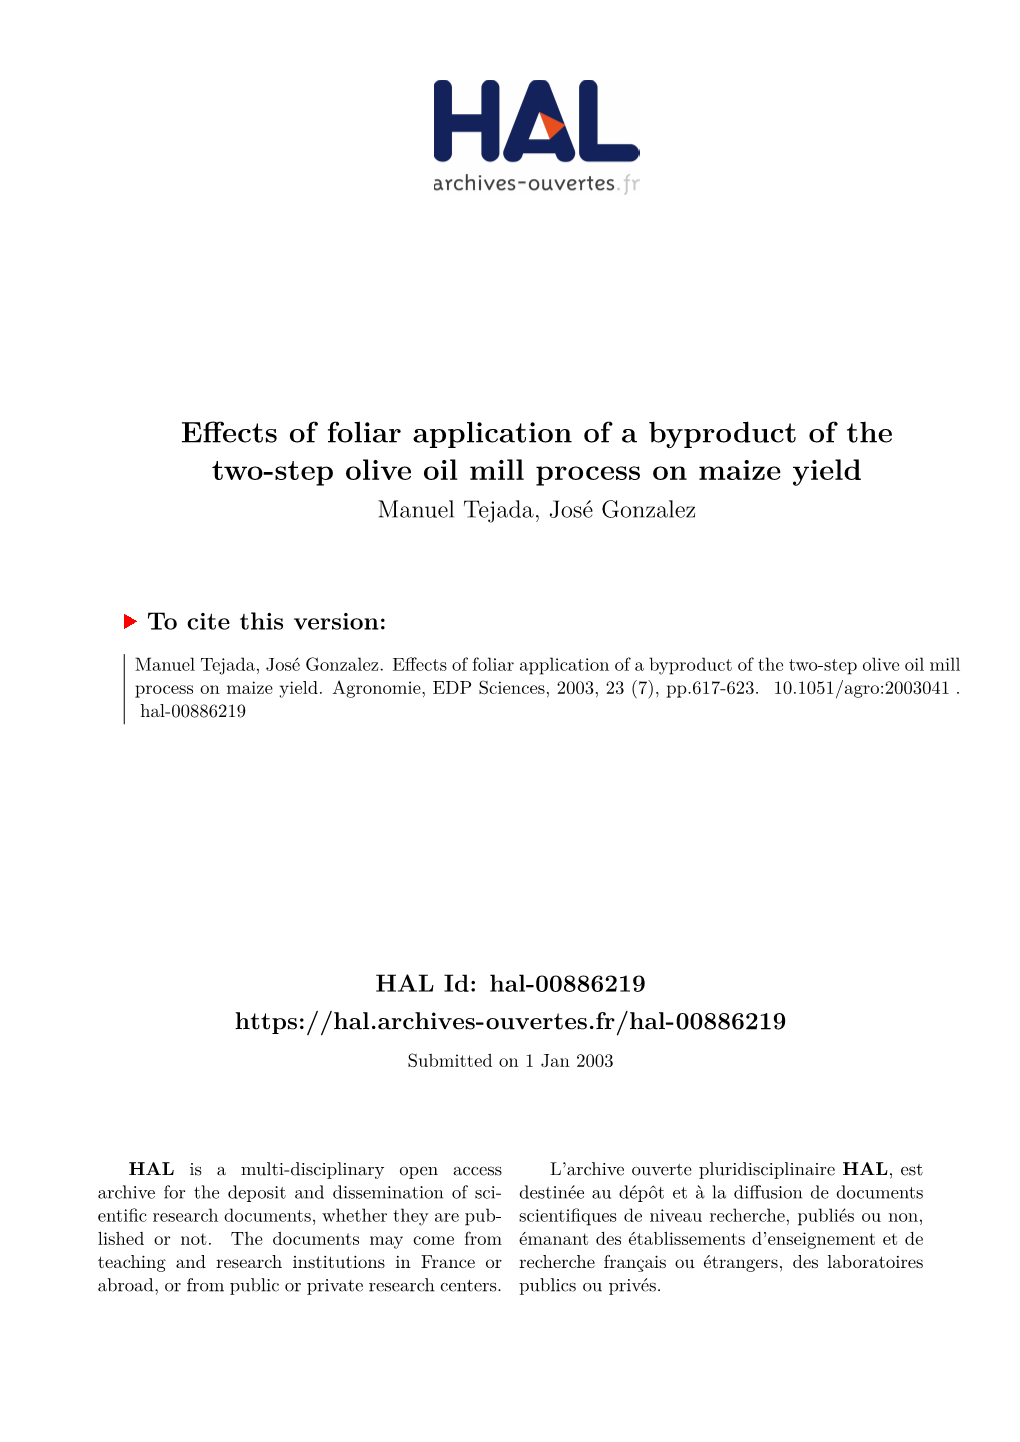 Effects of Foliar Application of a Byproduct Ofthe Two-Step Olive Oil Mill Process on Maize Yield Manuel Tejada, José Gonzalez